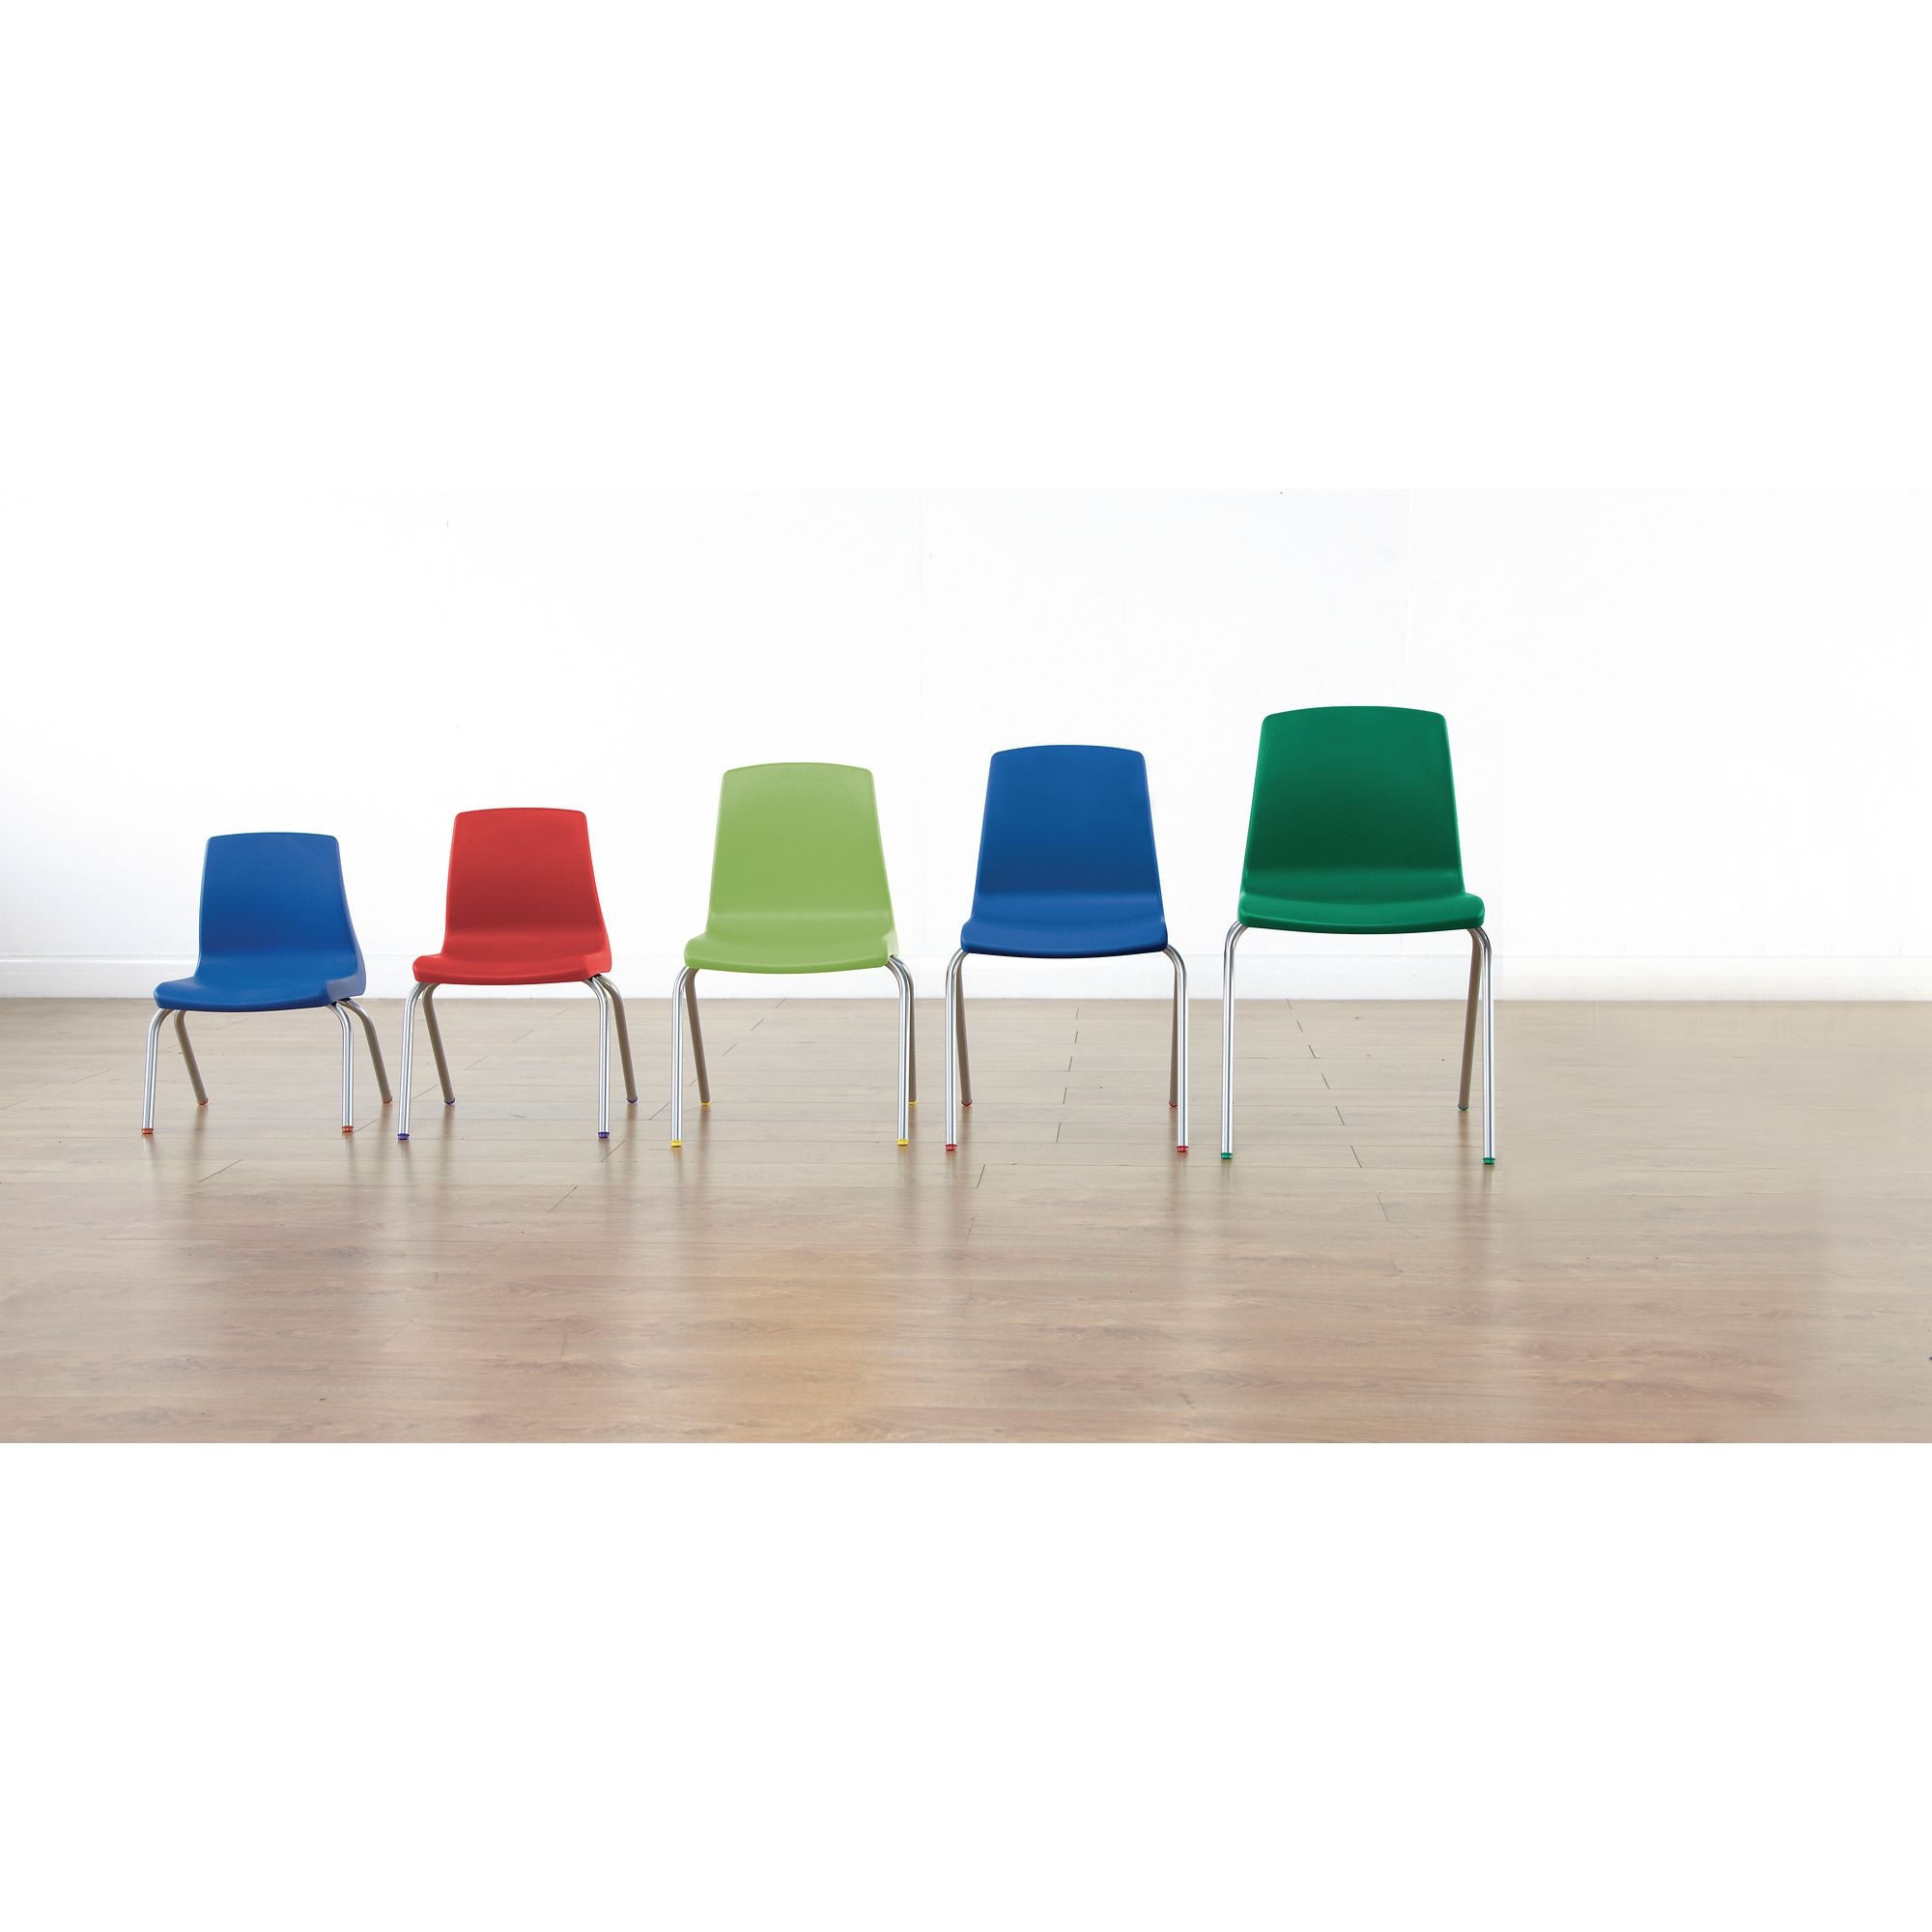 NP Chair - Size A - 260mm - Green